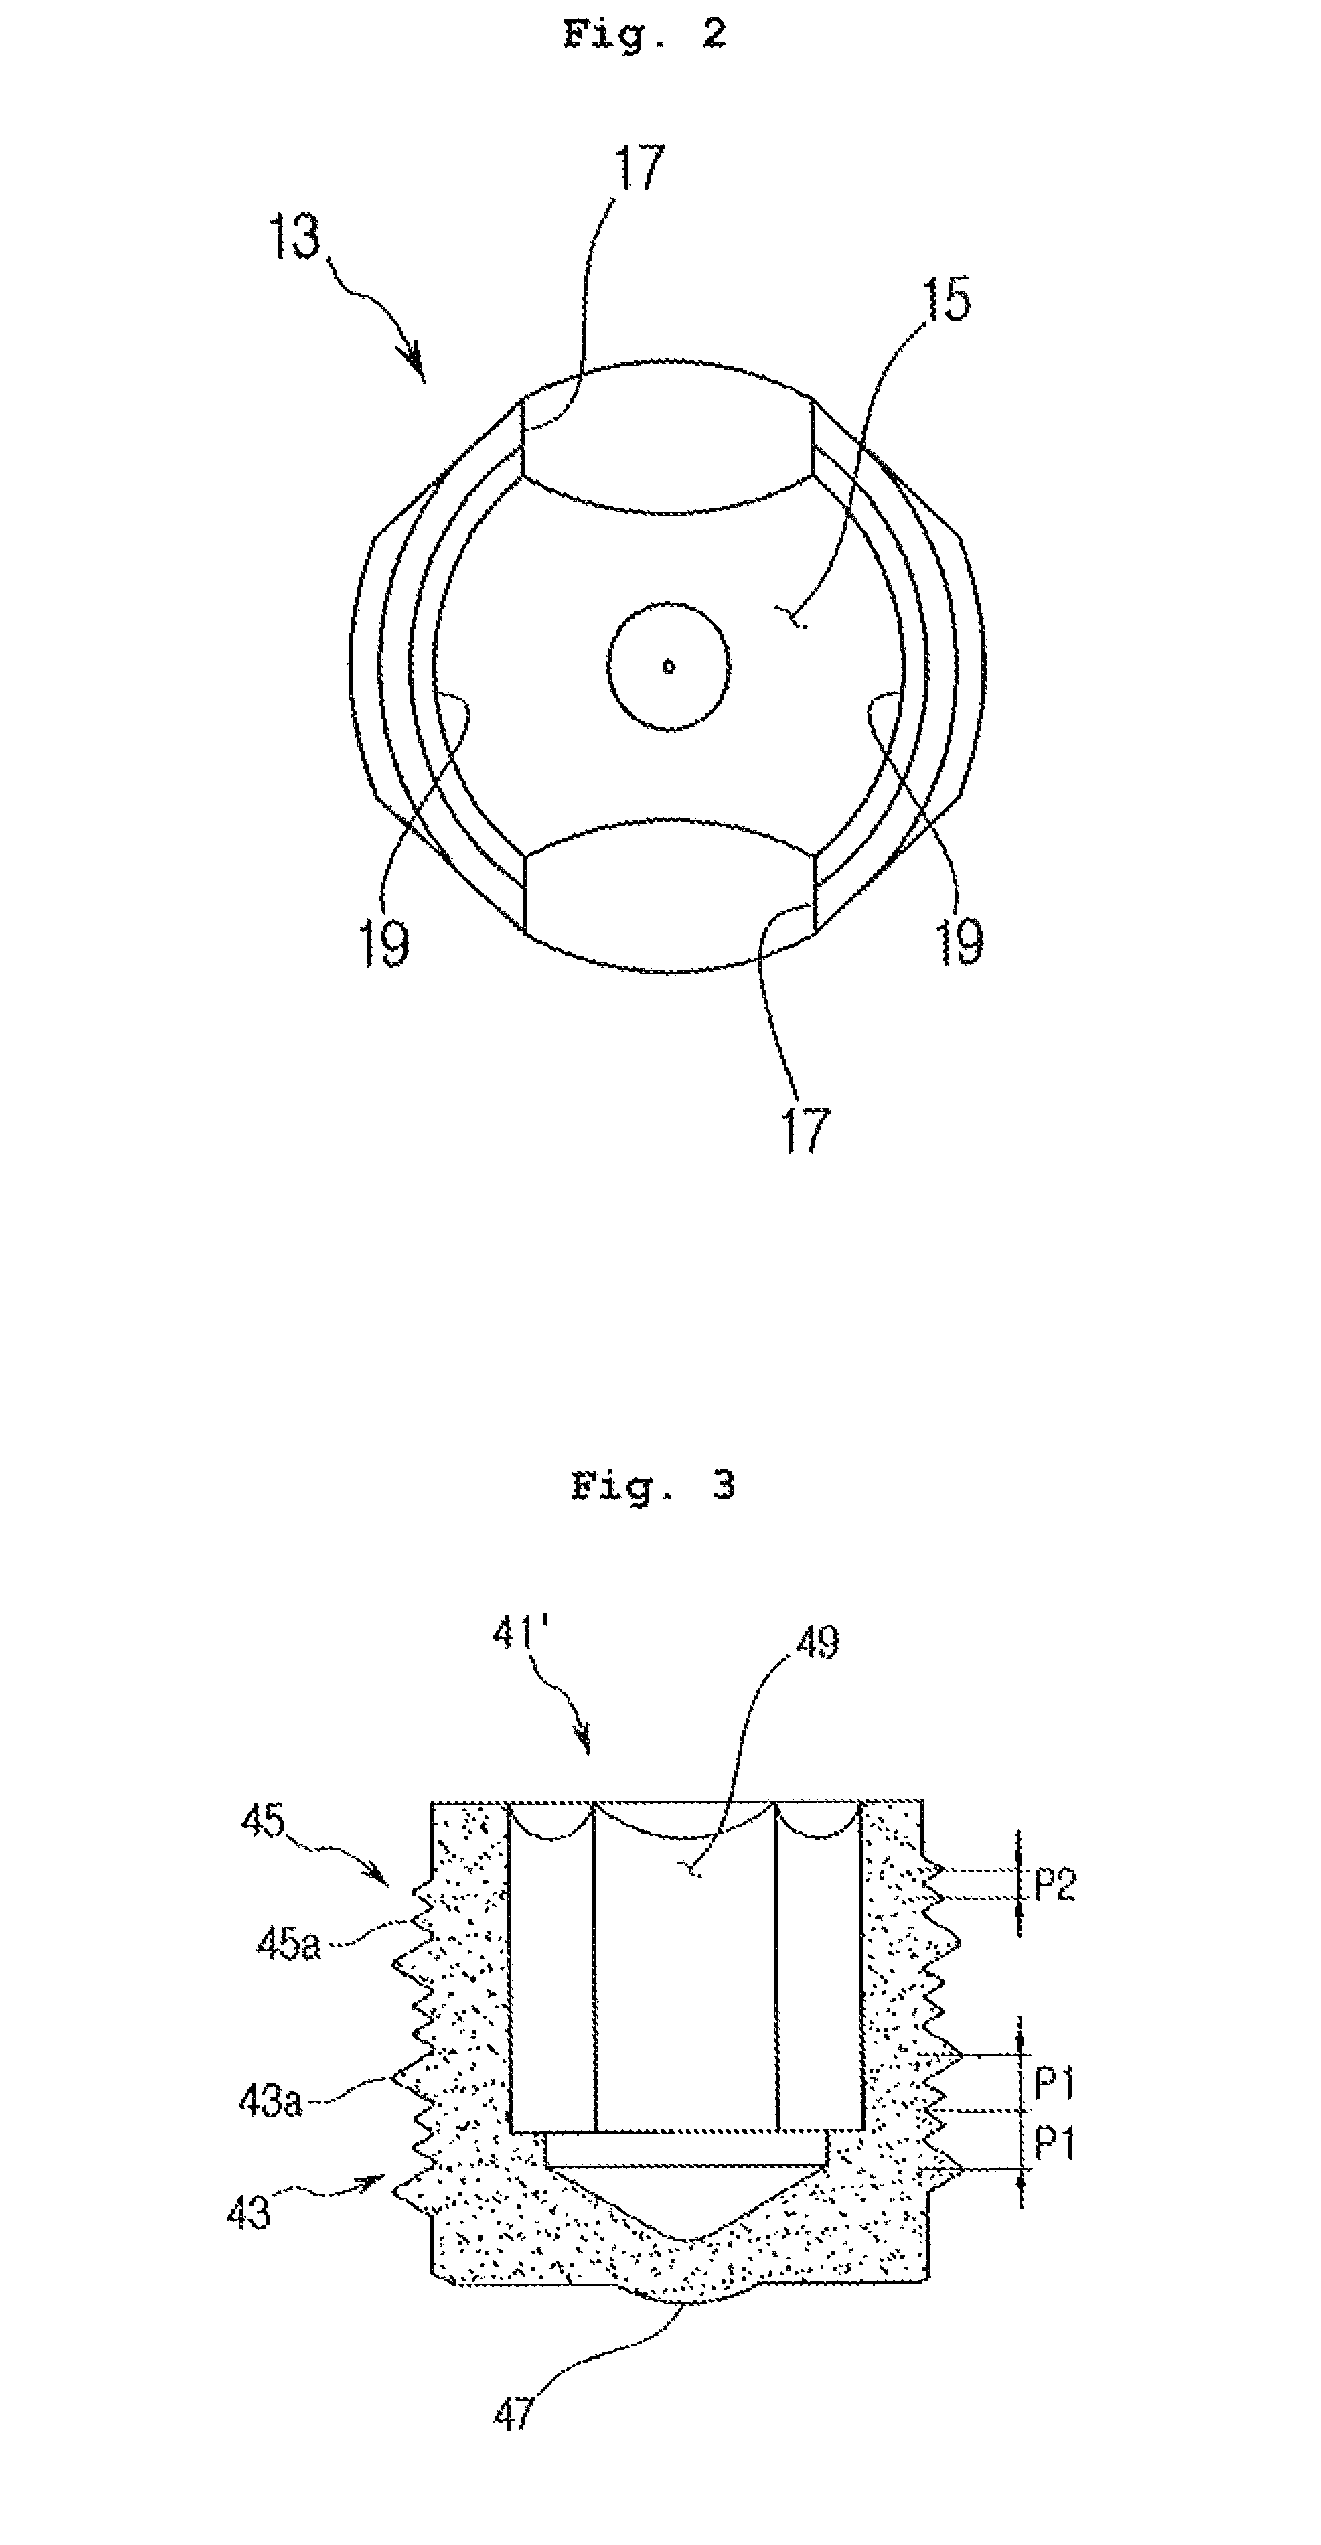 Spine fixation device containing set screw having double spiral form